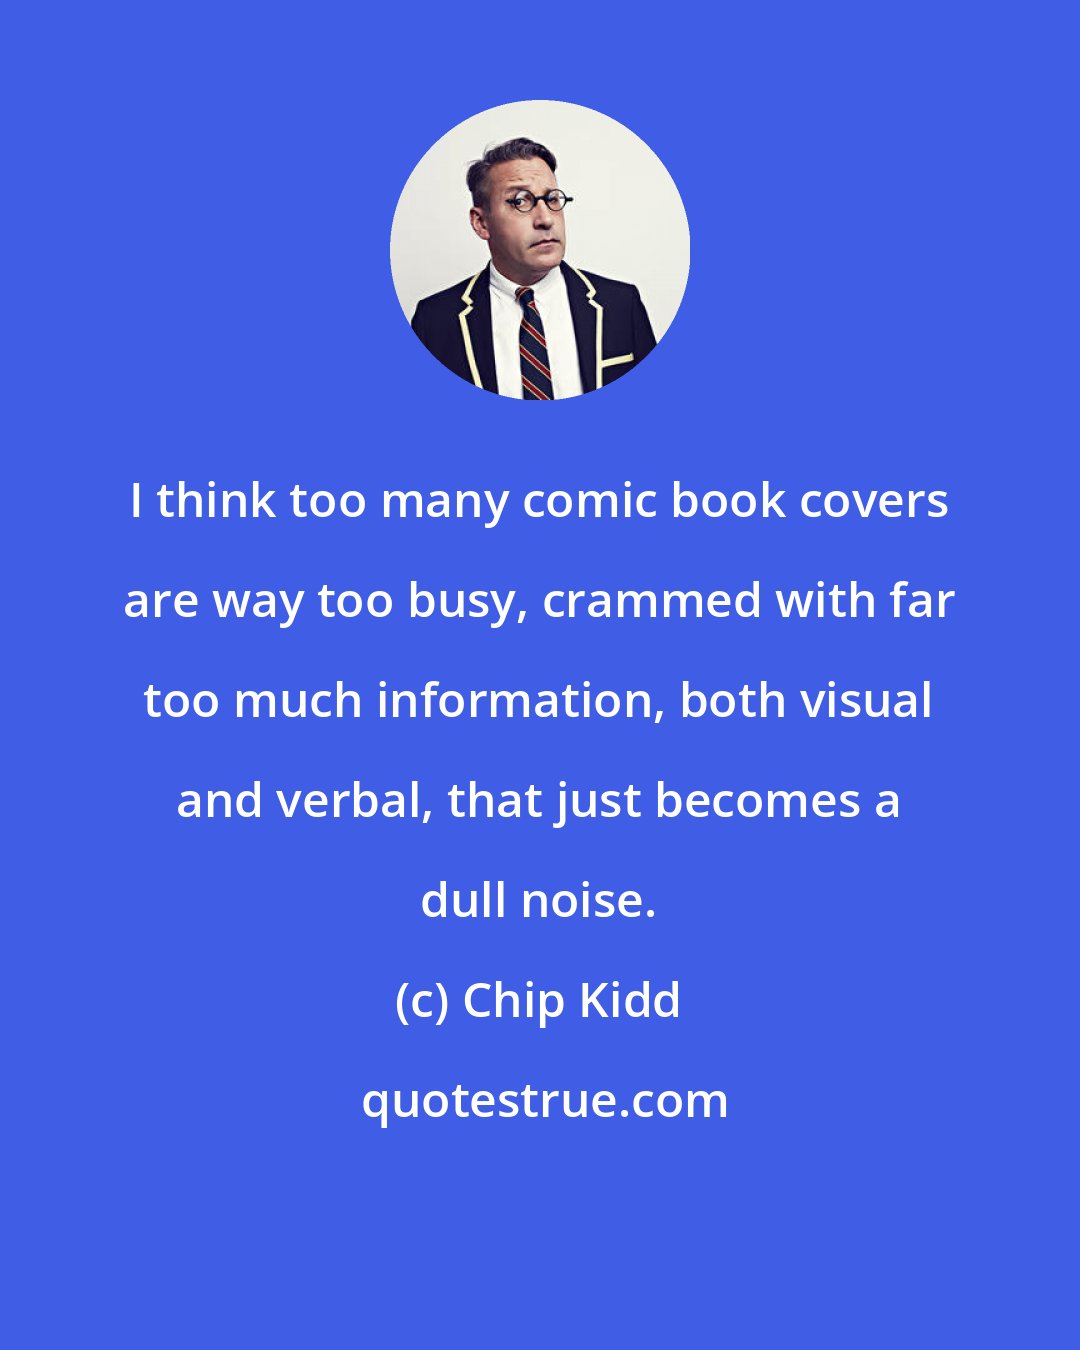 Chip Kidd: I think too many comic book covers are way too busy, crammed with far too much information, both visual and verbal, that just becomes a dull noise.